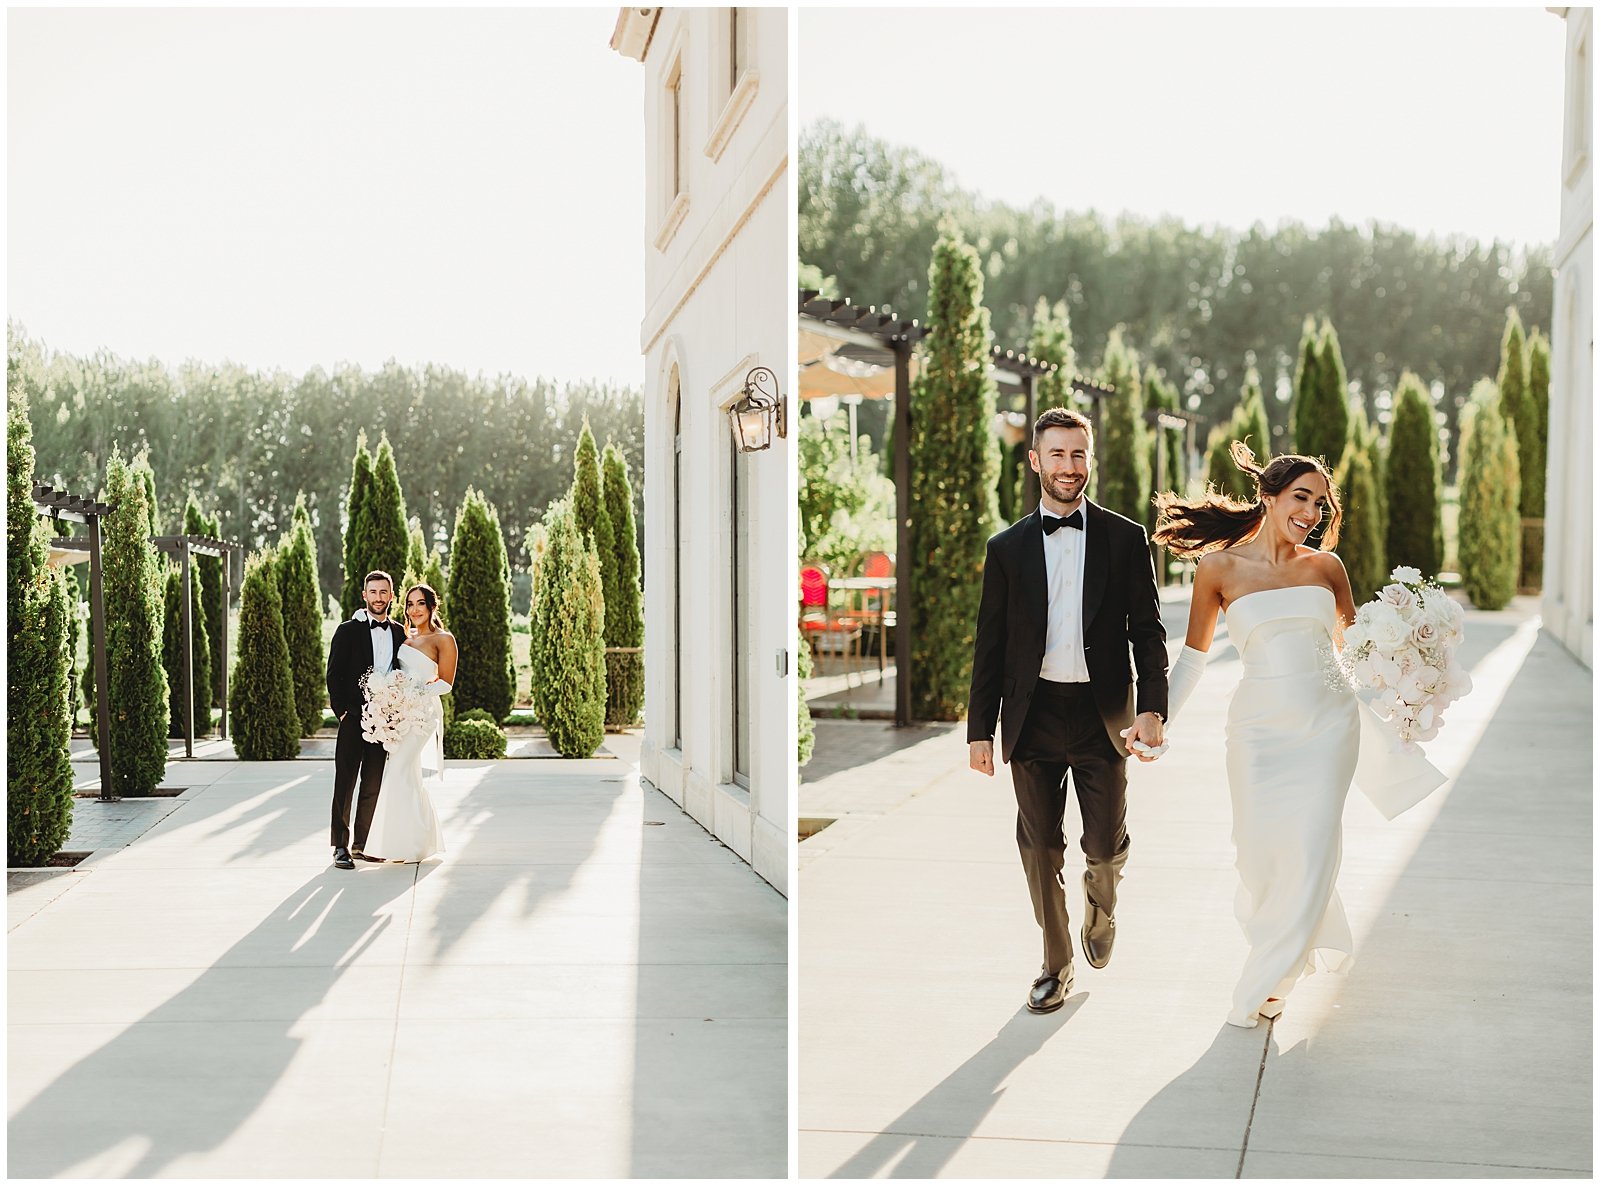 Golden Hour Portraits - Romantic Modern Wedding at Chateau des Fleurs in Eagle Idaho by Ivory and Sage Events